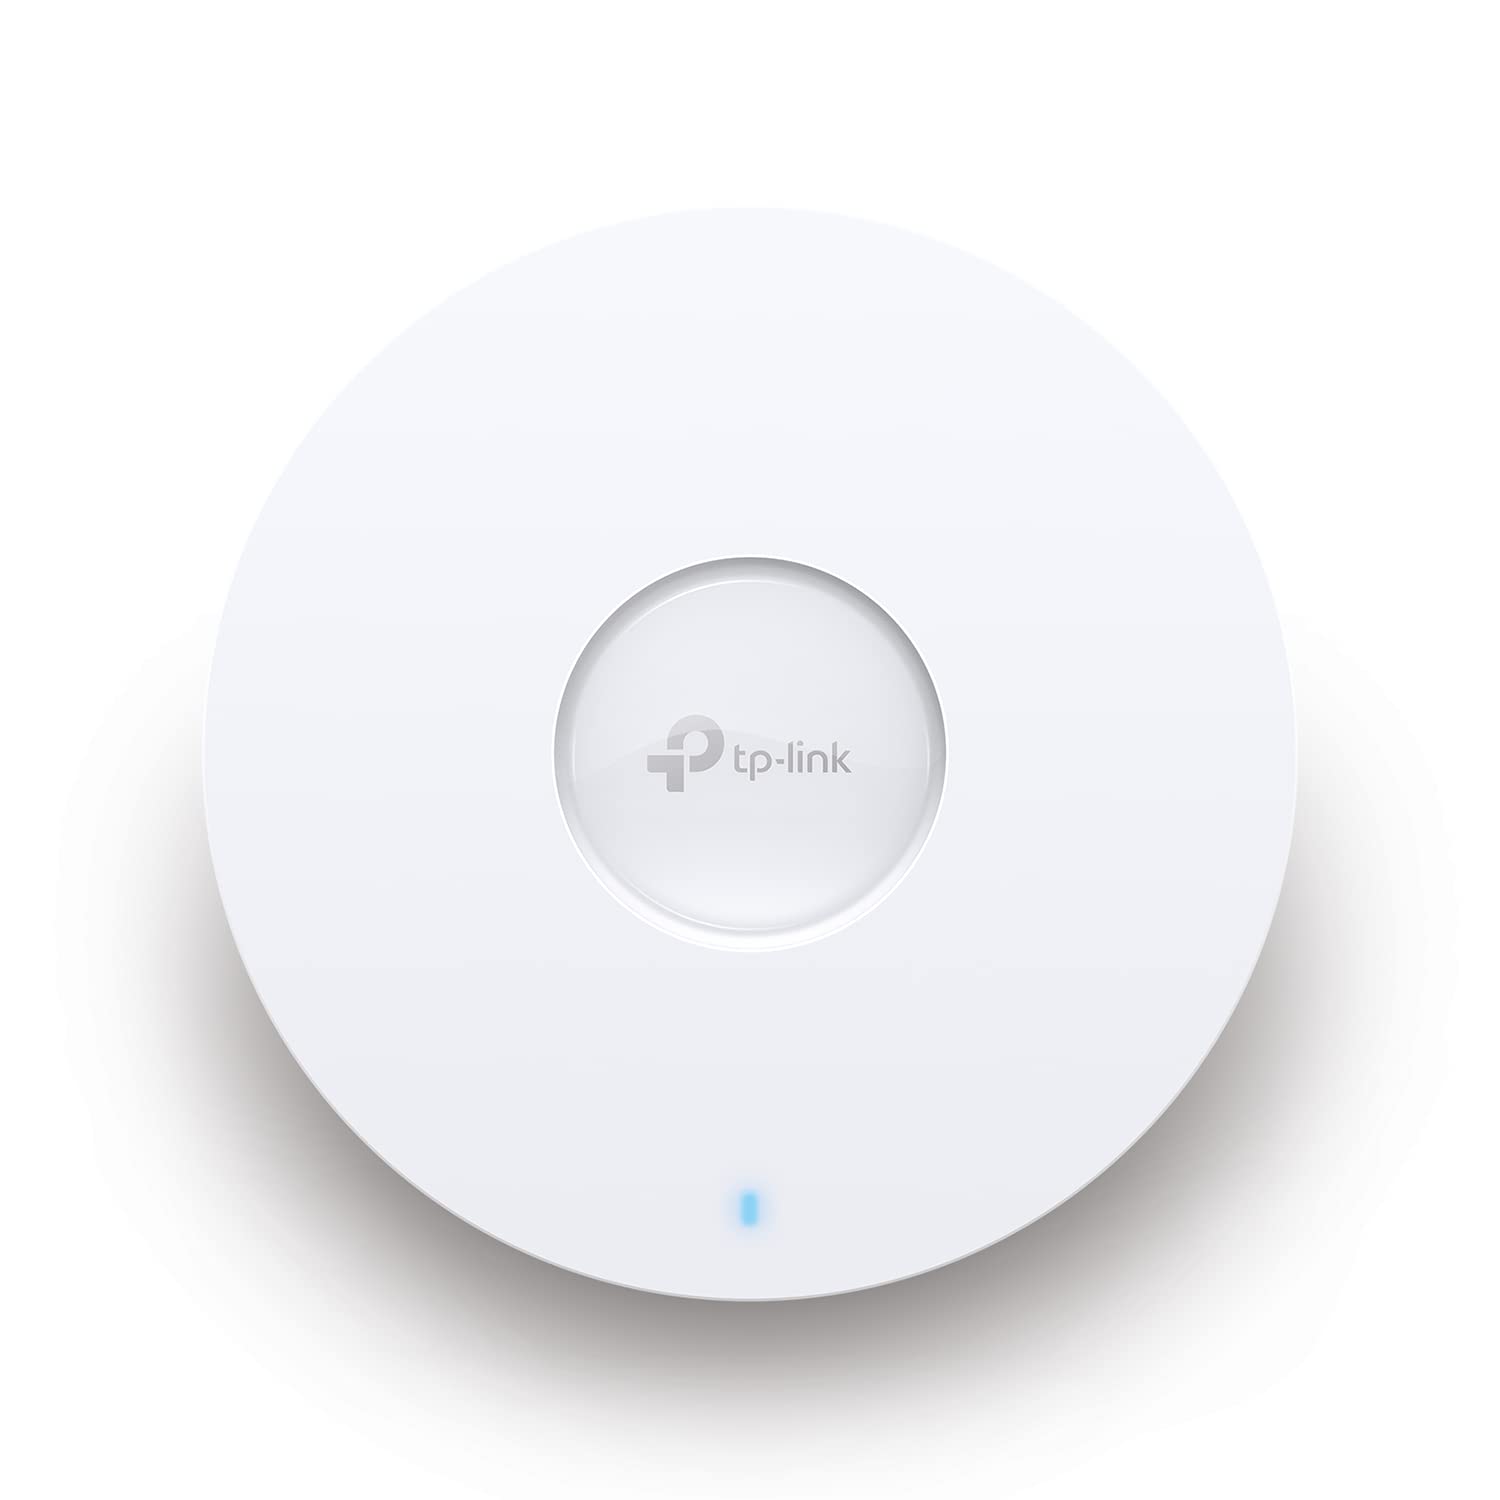 TP-Link EAP610 Ultra-Slim Wireless Access Point Omada True Wi-Fi 6 AX1800 DC Adapter Included Mesh Seamless Roaming, WPA3 MU-MIMO Remote & App Control PoE+ Powered - $84.99